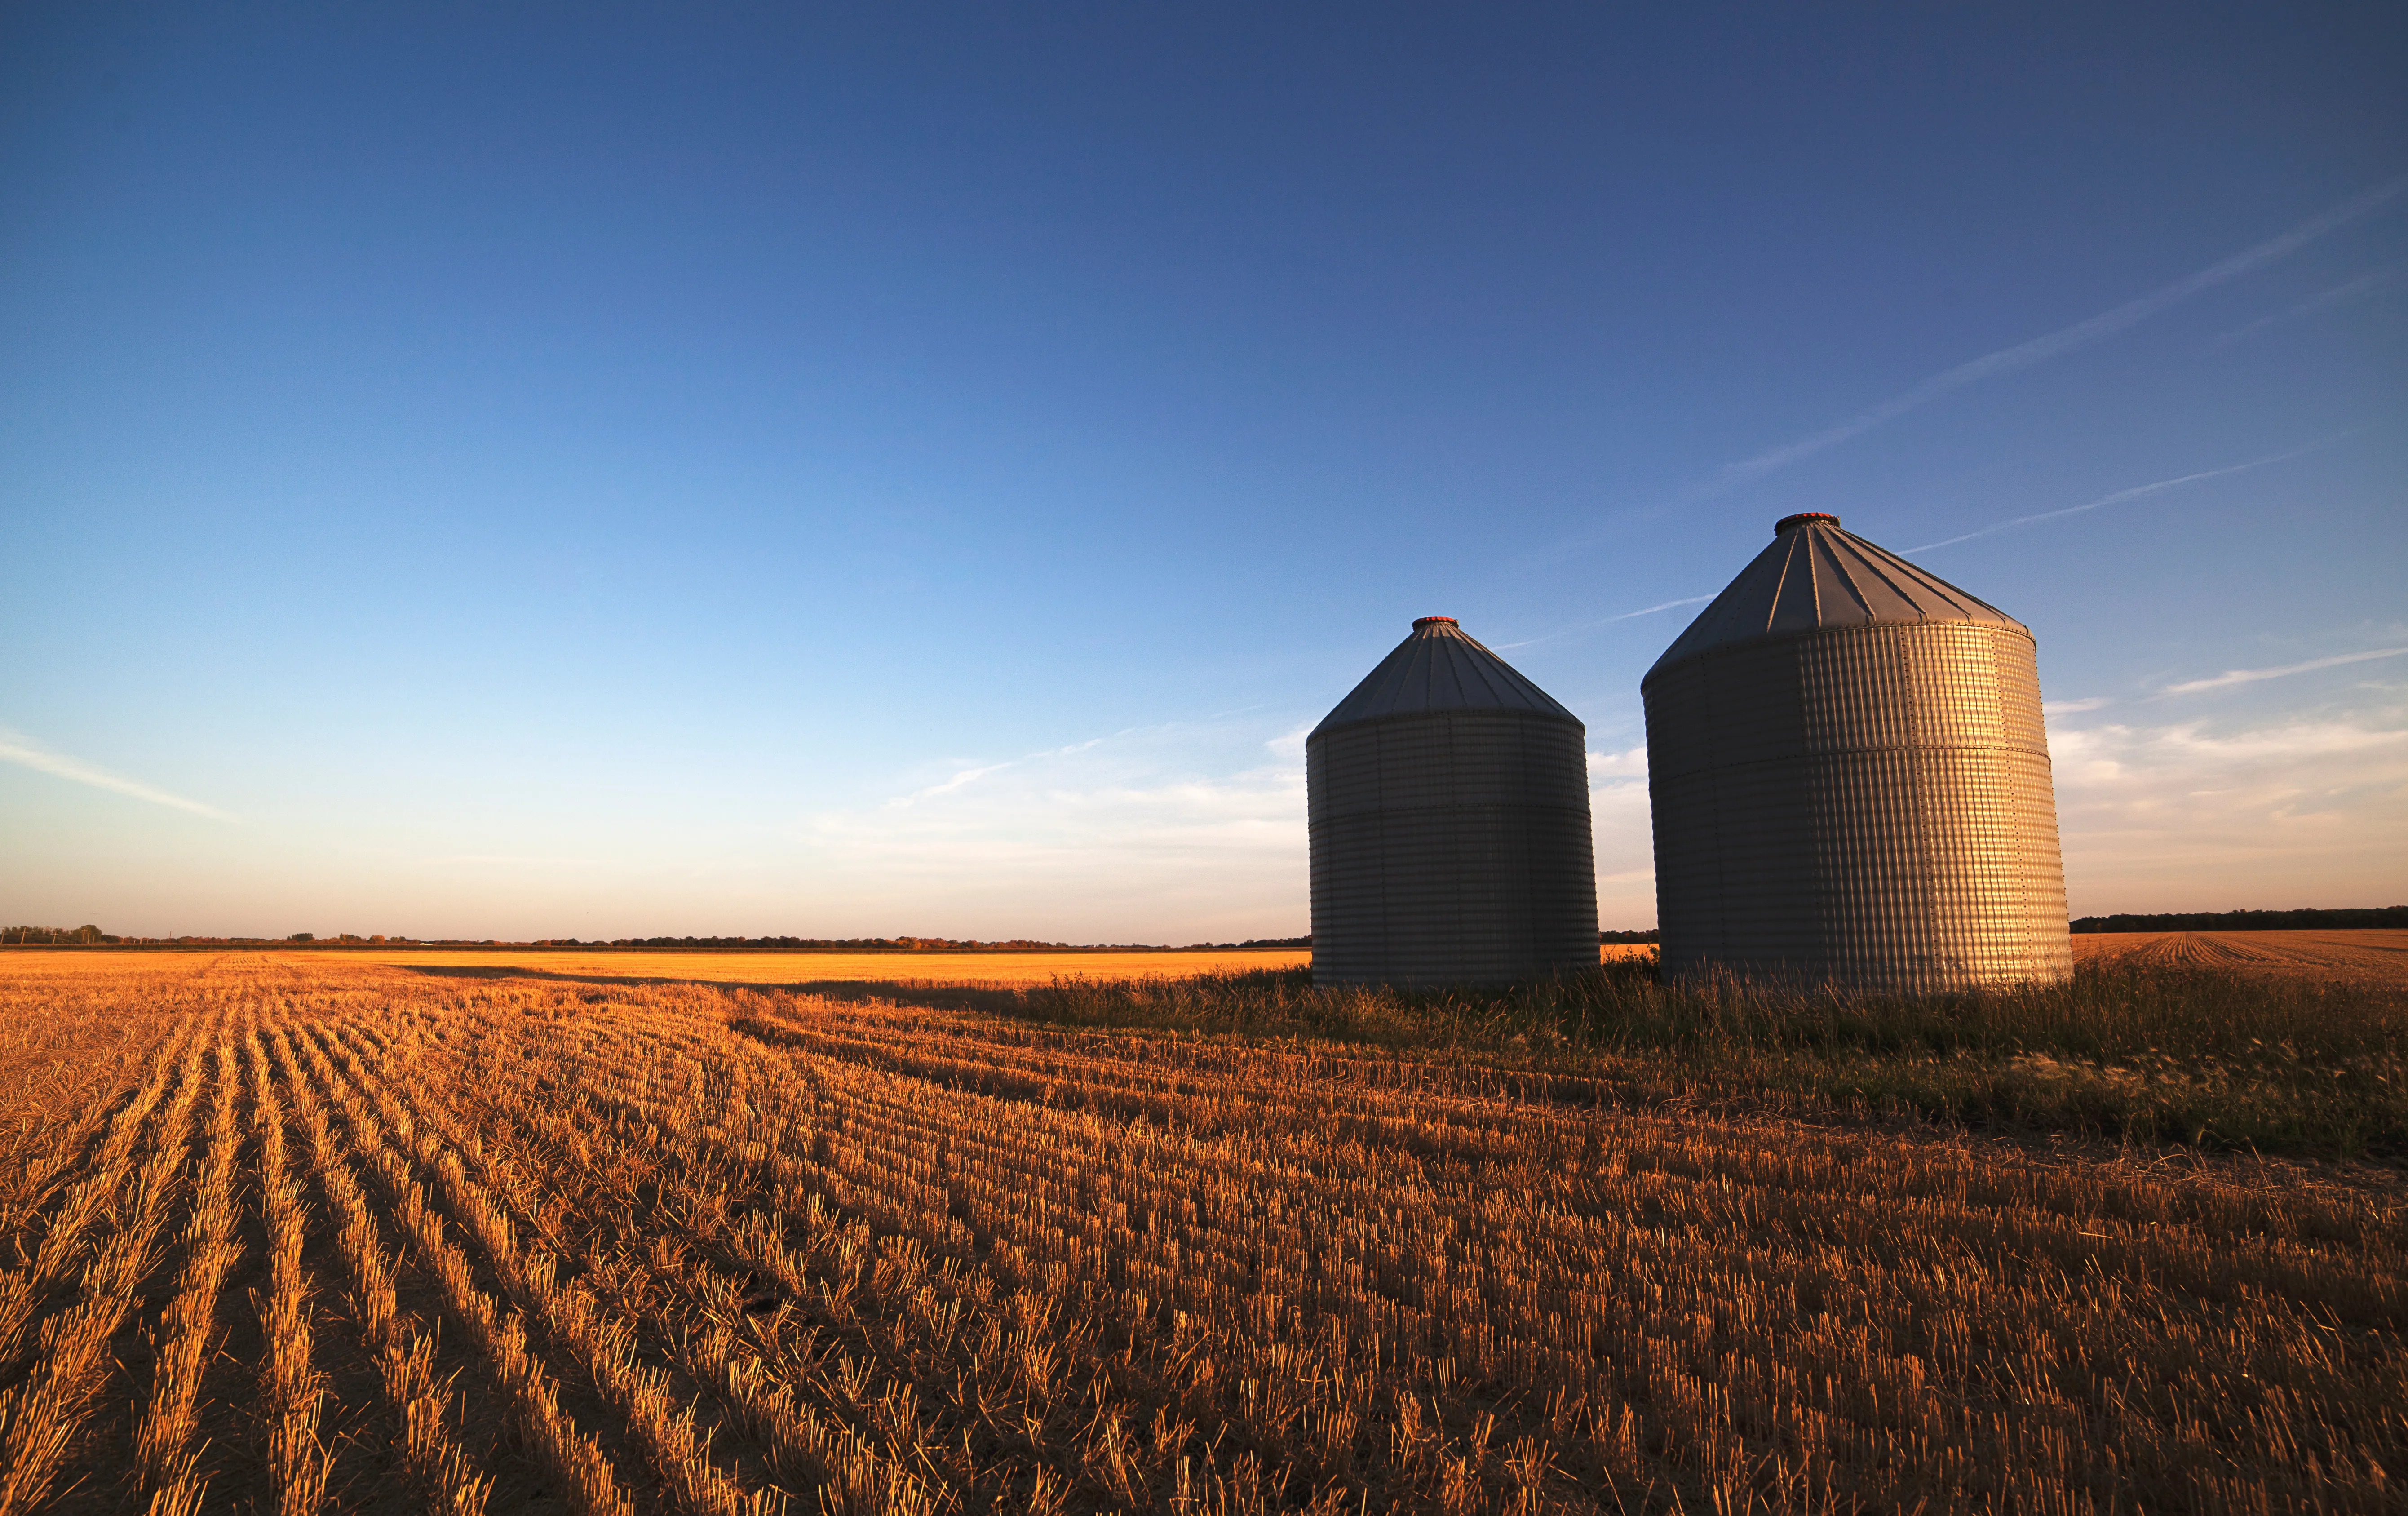 an image of two silos in a field